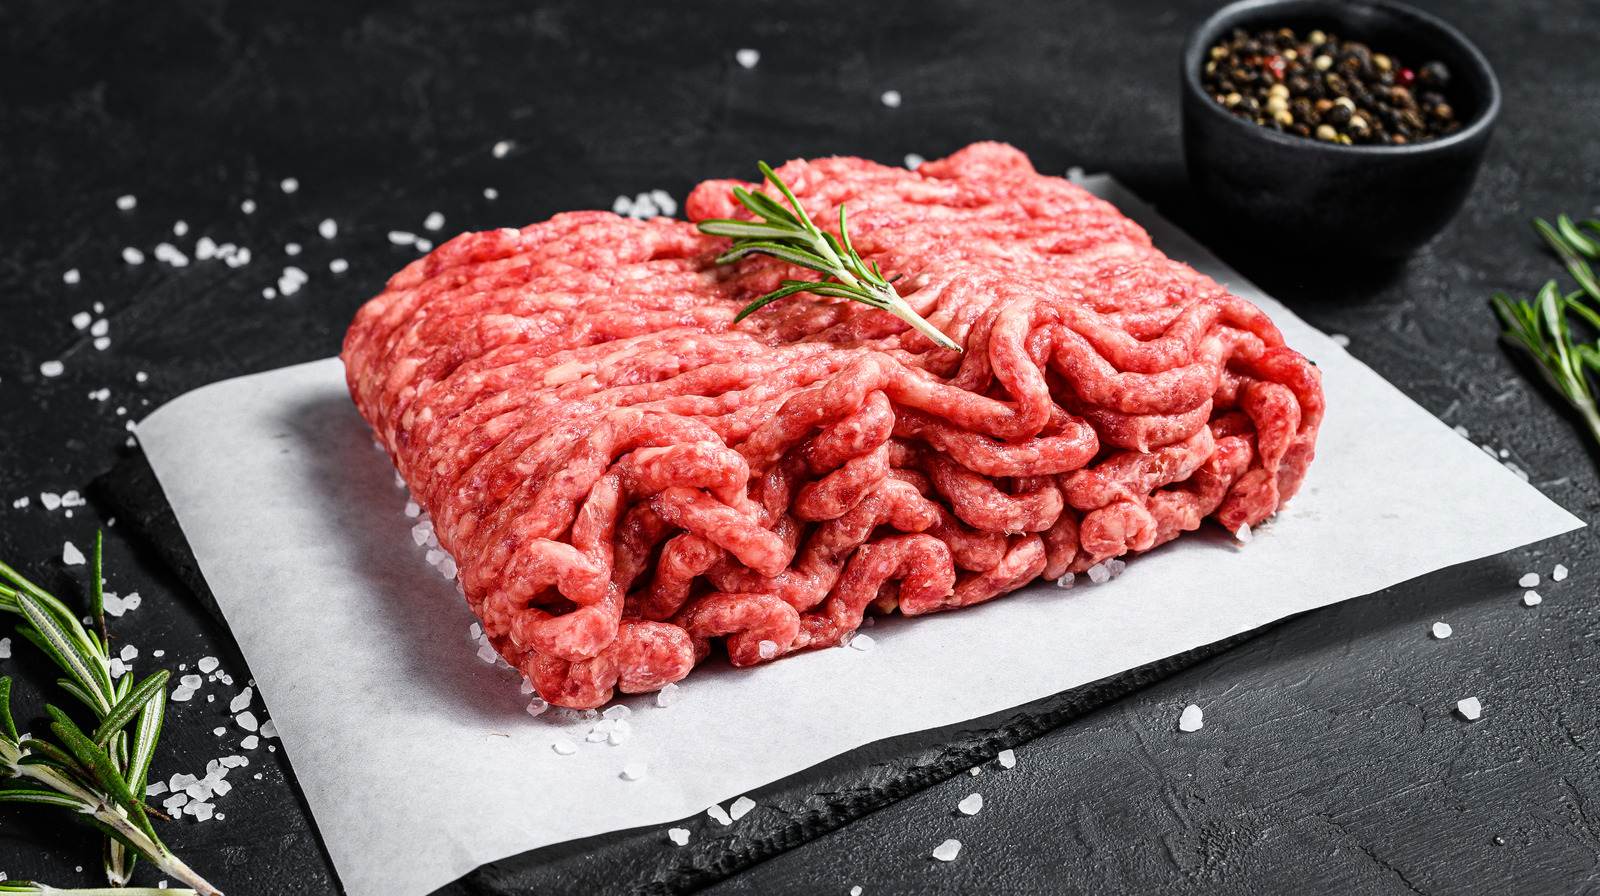 https://www.tastingtable.com/img/gallery/the-kitchen-tool-that-makes-cooking-ground-meat-easier-than-ever/l-intro-1667755179.jpg